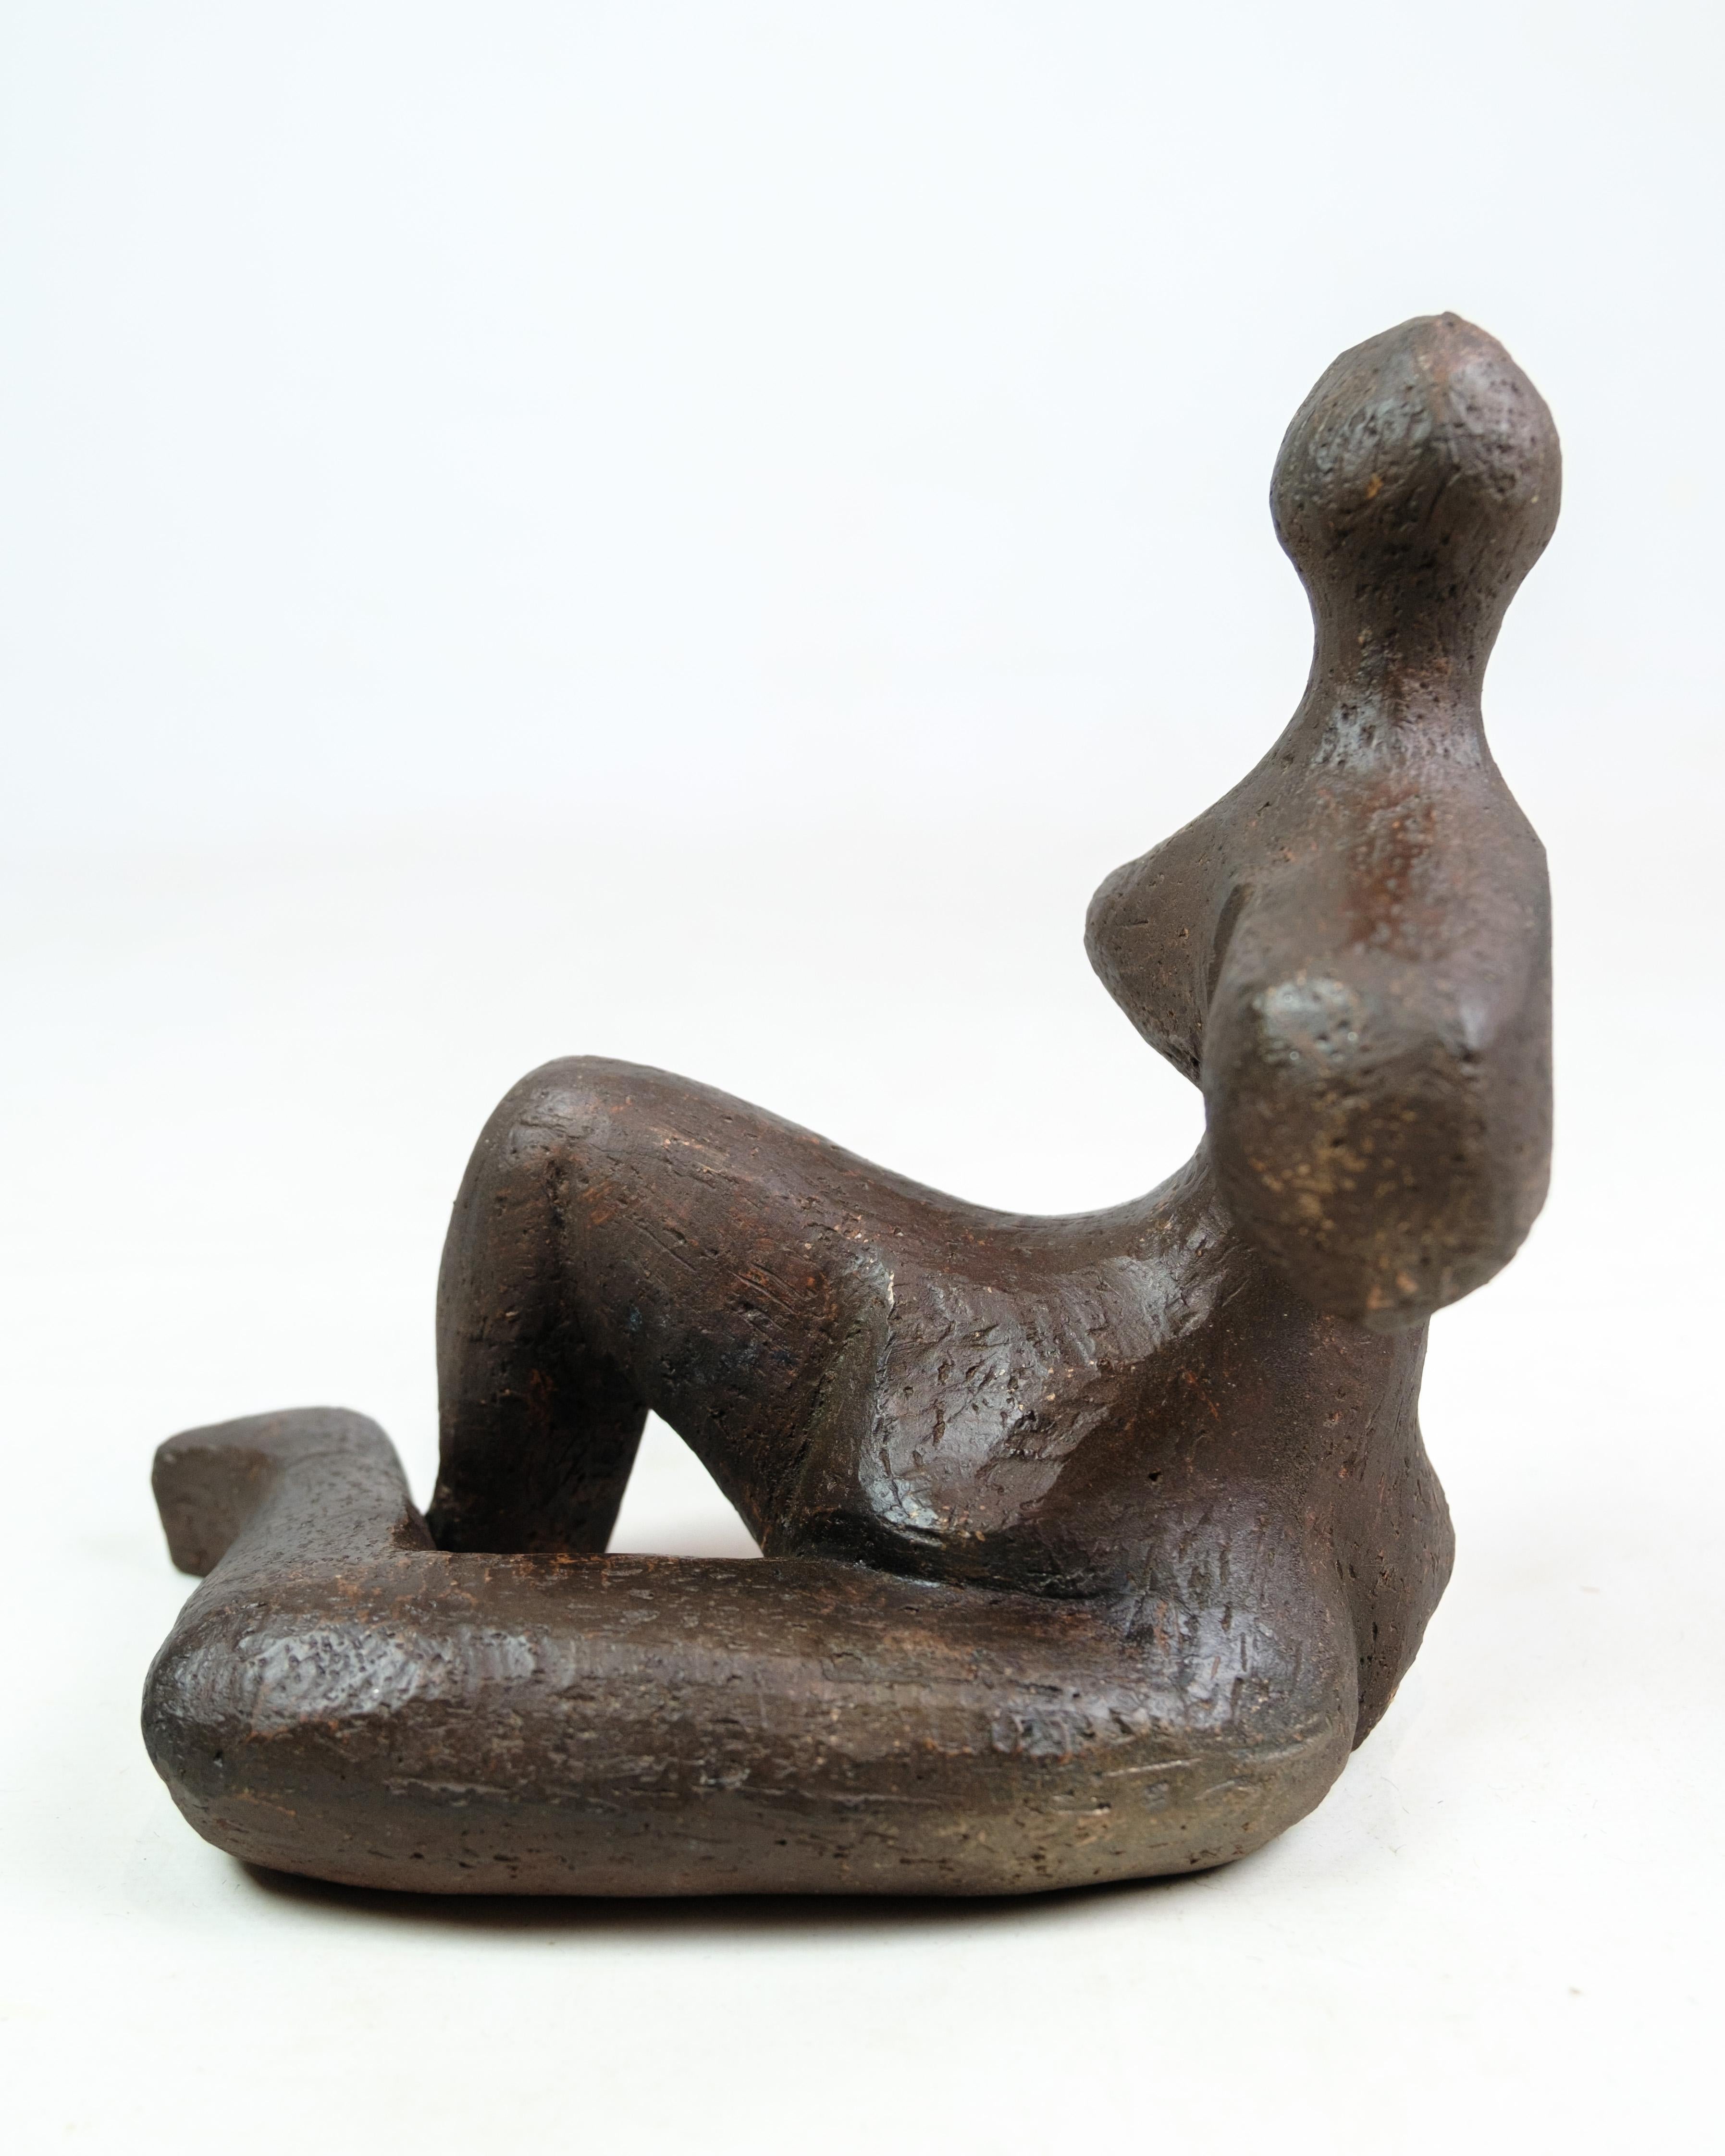   Sculpture Designed And Made By Espen Kalmann In Good Condition For Sale In Lejre, DK